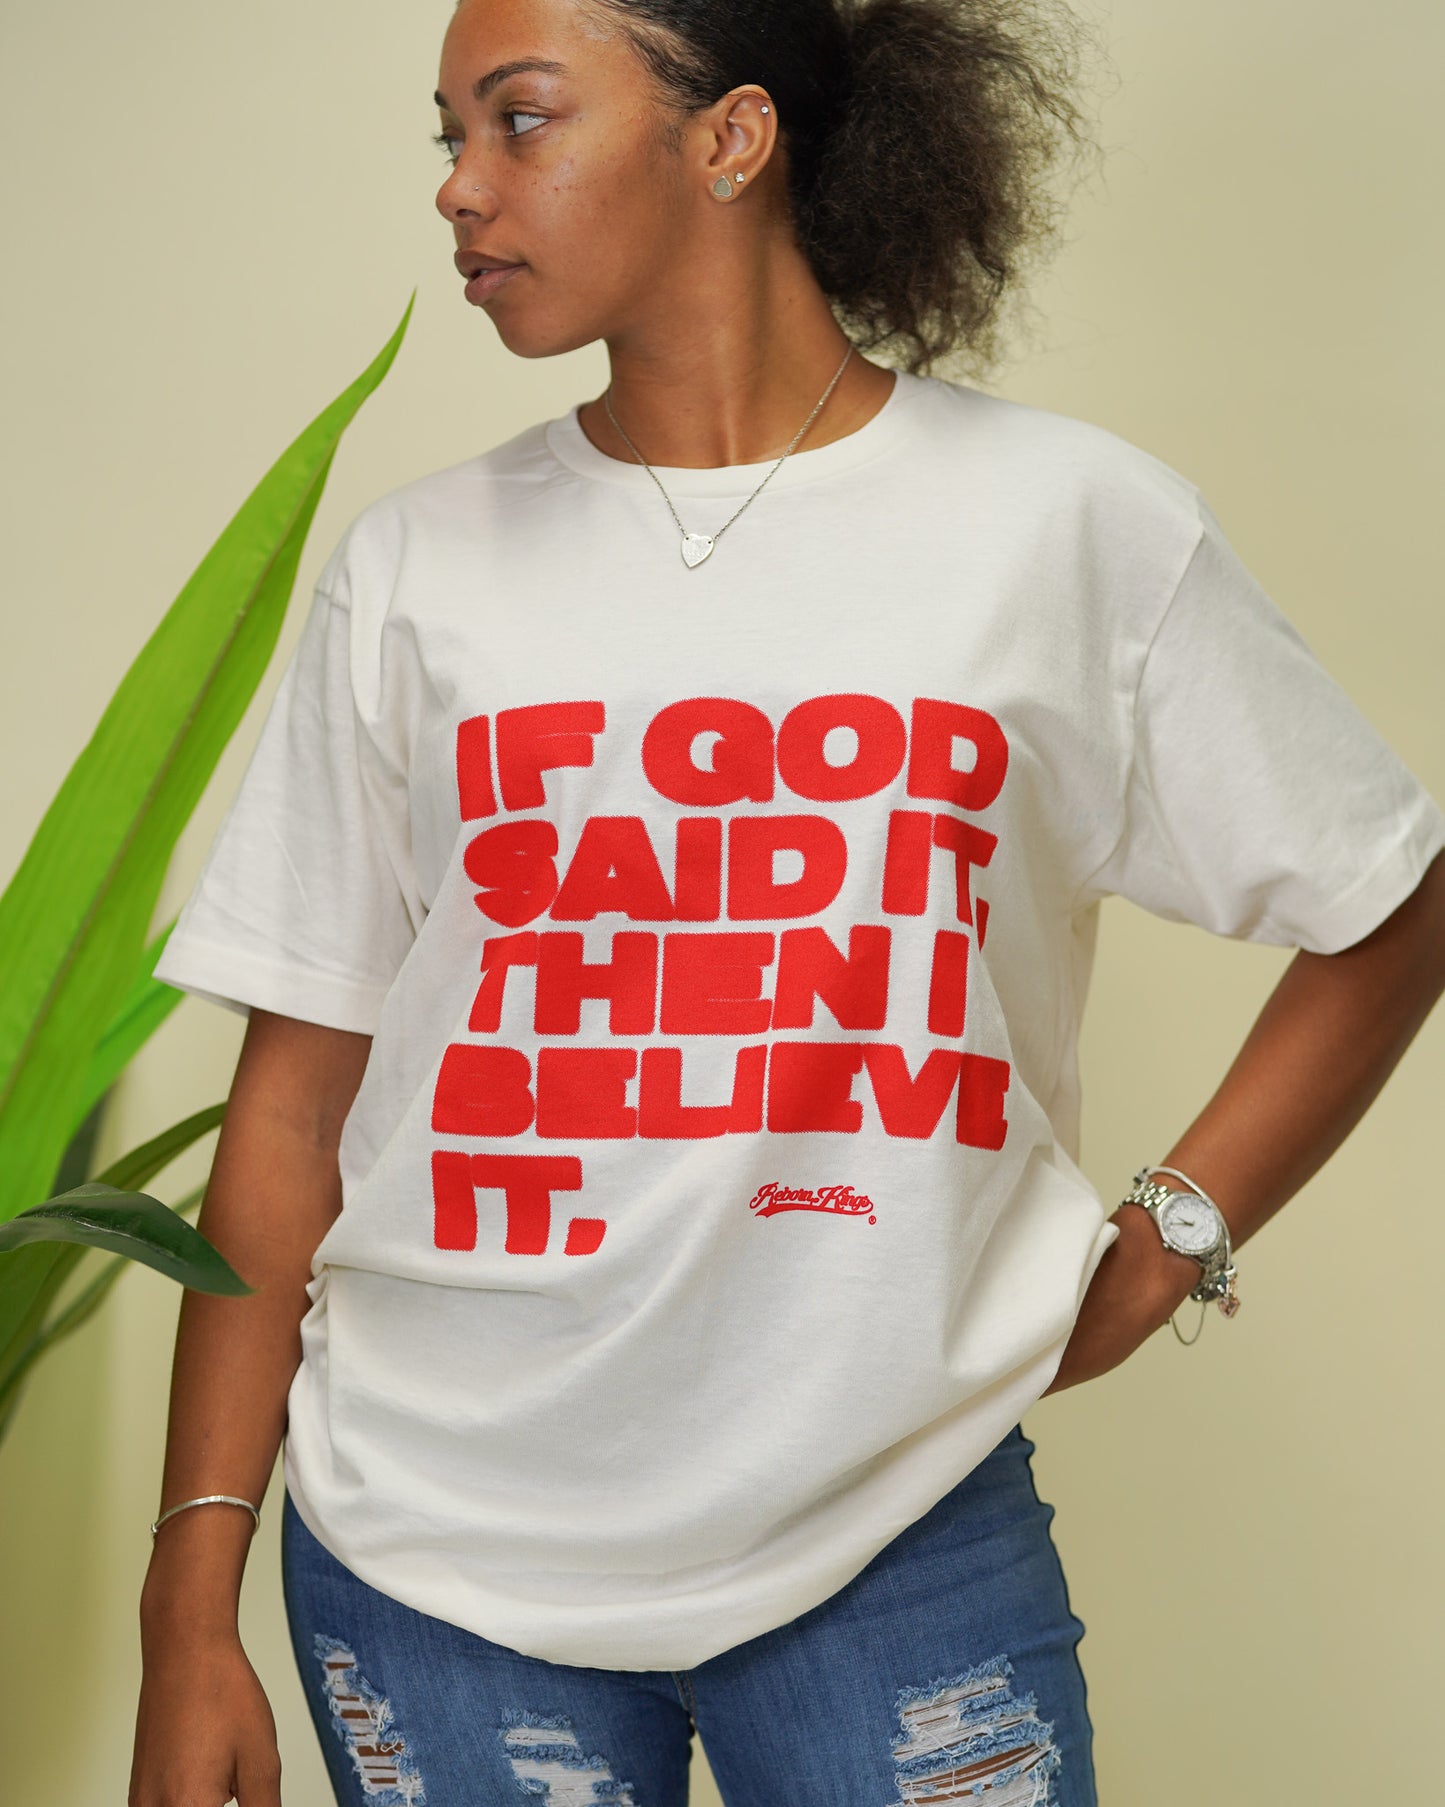 If God Said It, Then I Believe It Tee in Vintage White